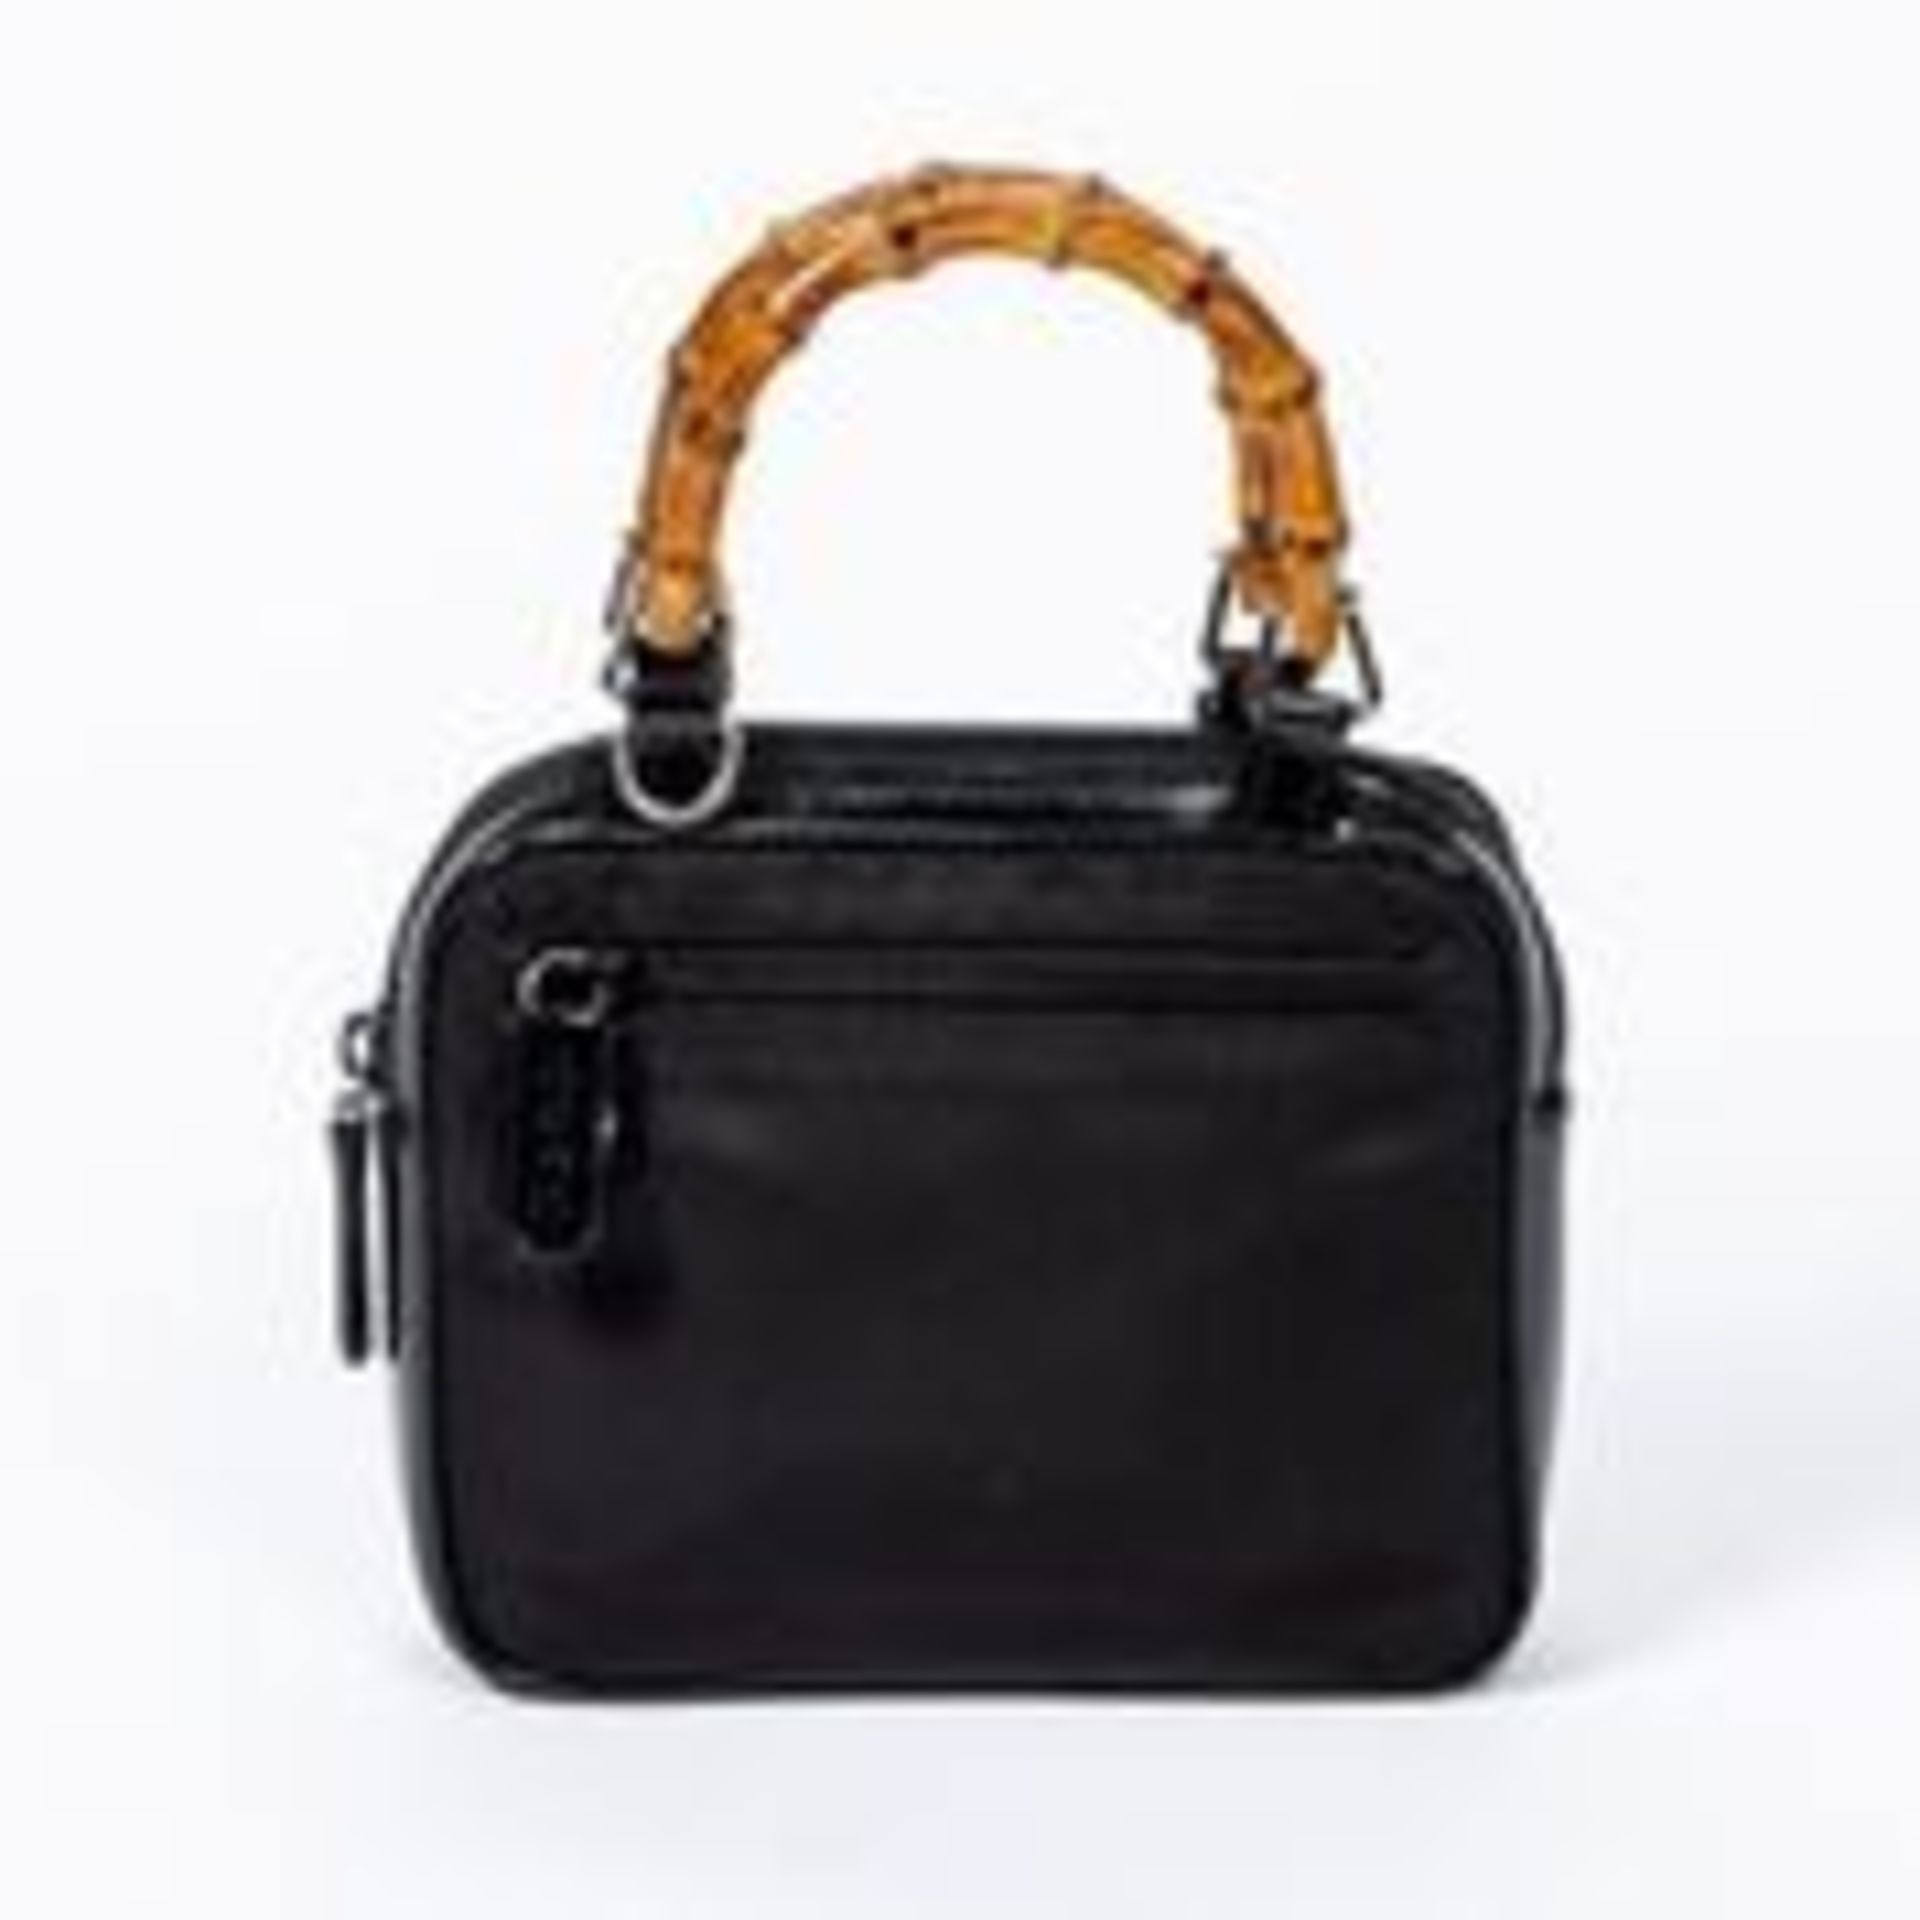 RRP £780 Vintage Mini Bamboo Tote Handbag Black - AAP0148 - Grade A - Please Contact Us Directly For